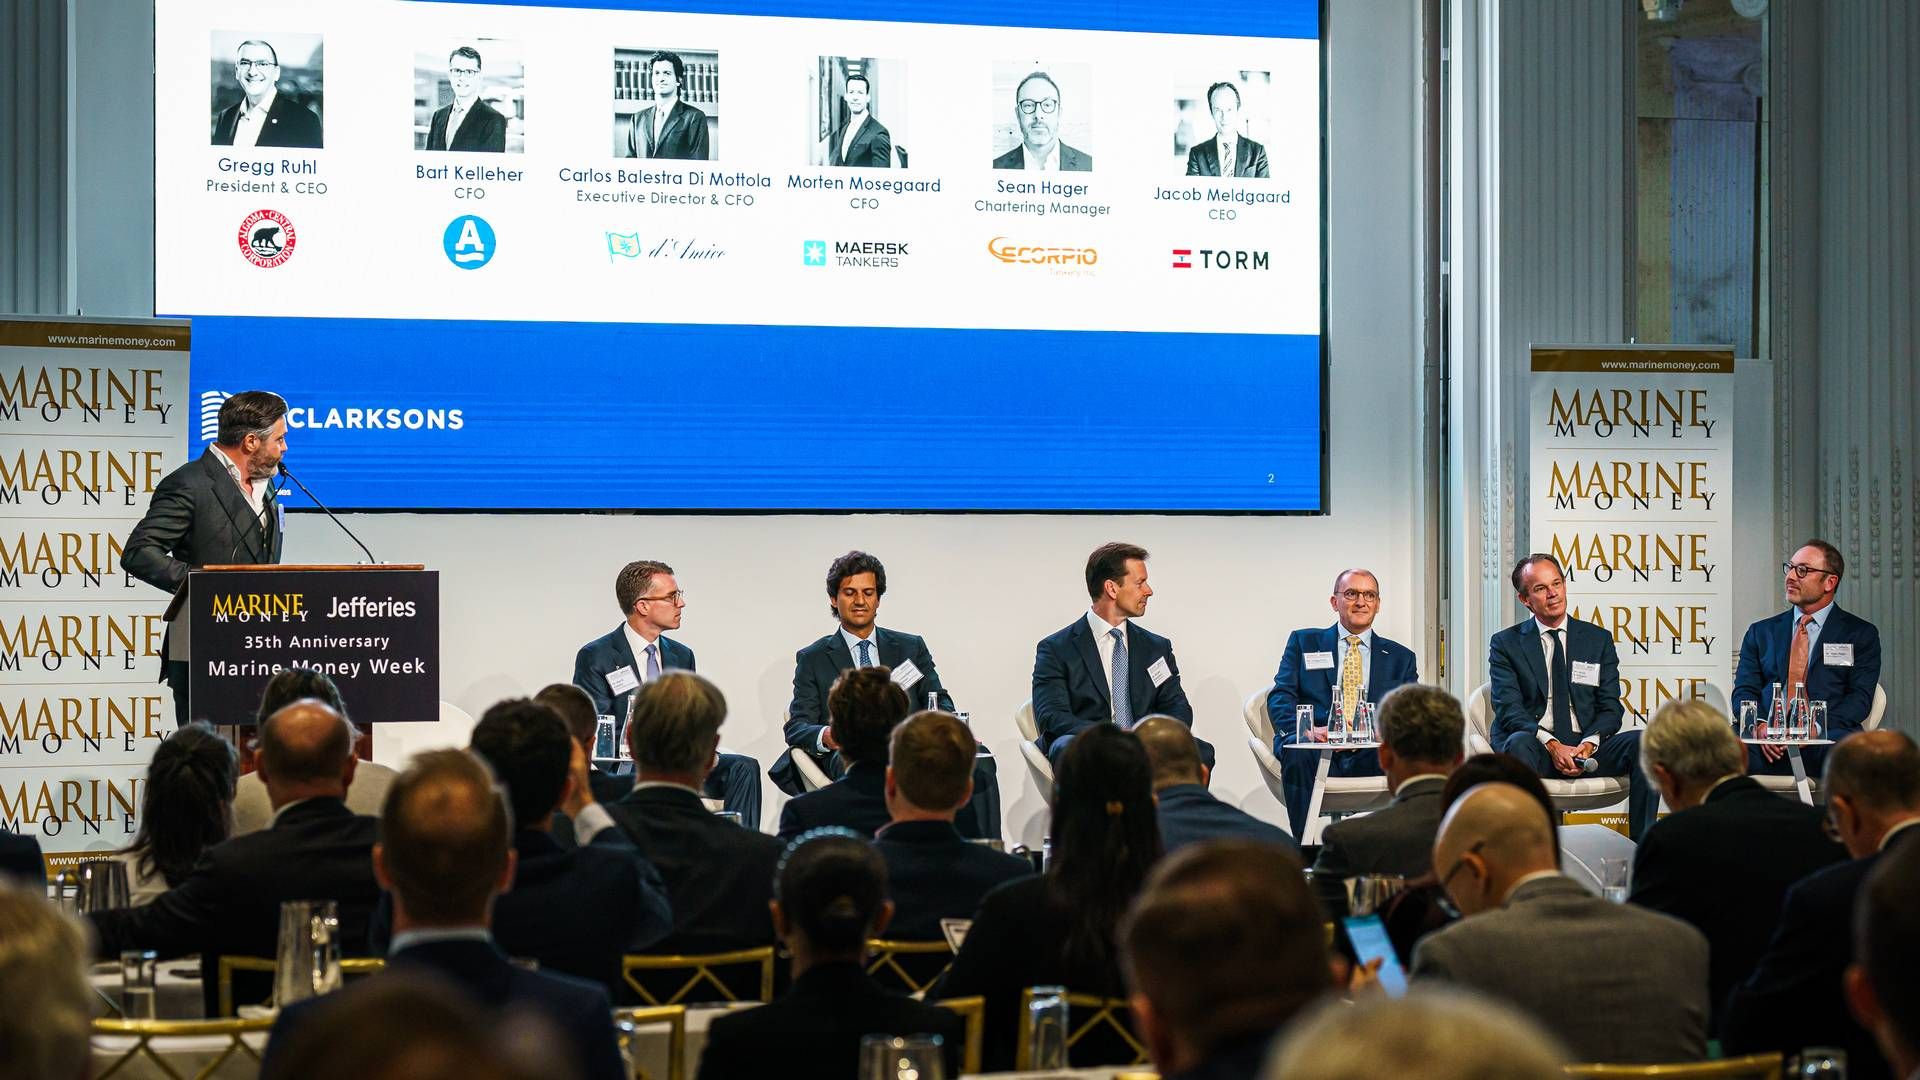 Several representatives from the product tanker segment gathered at a panel discussion in New York, including Maersk Tankers CFO Morten Mosegaard and Torm CEO Jacob Meldgaard. | Photo: David Butler Ii